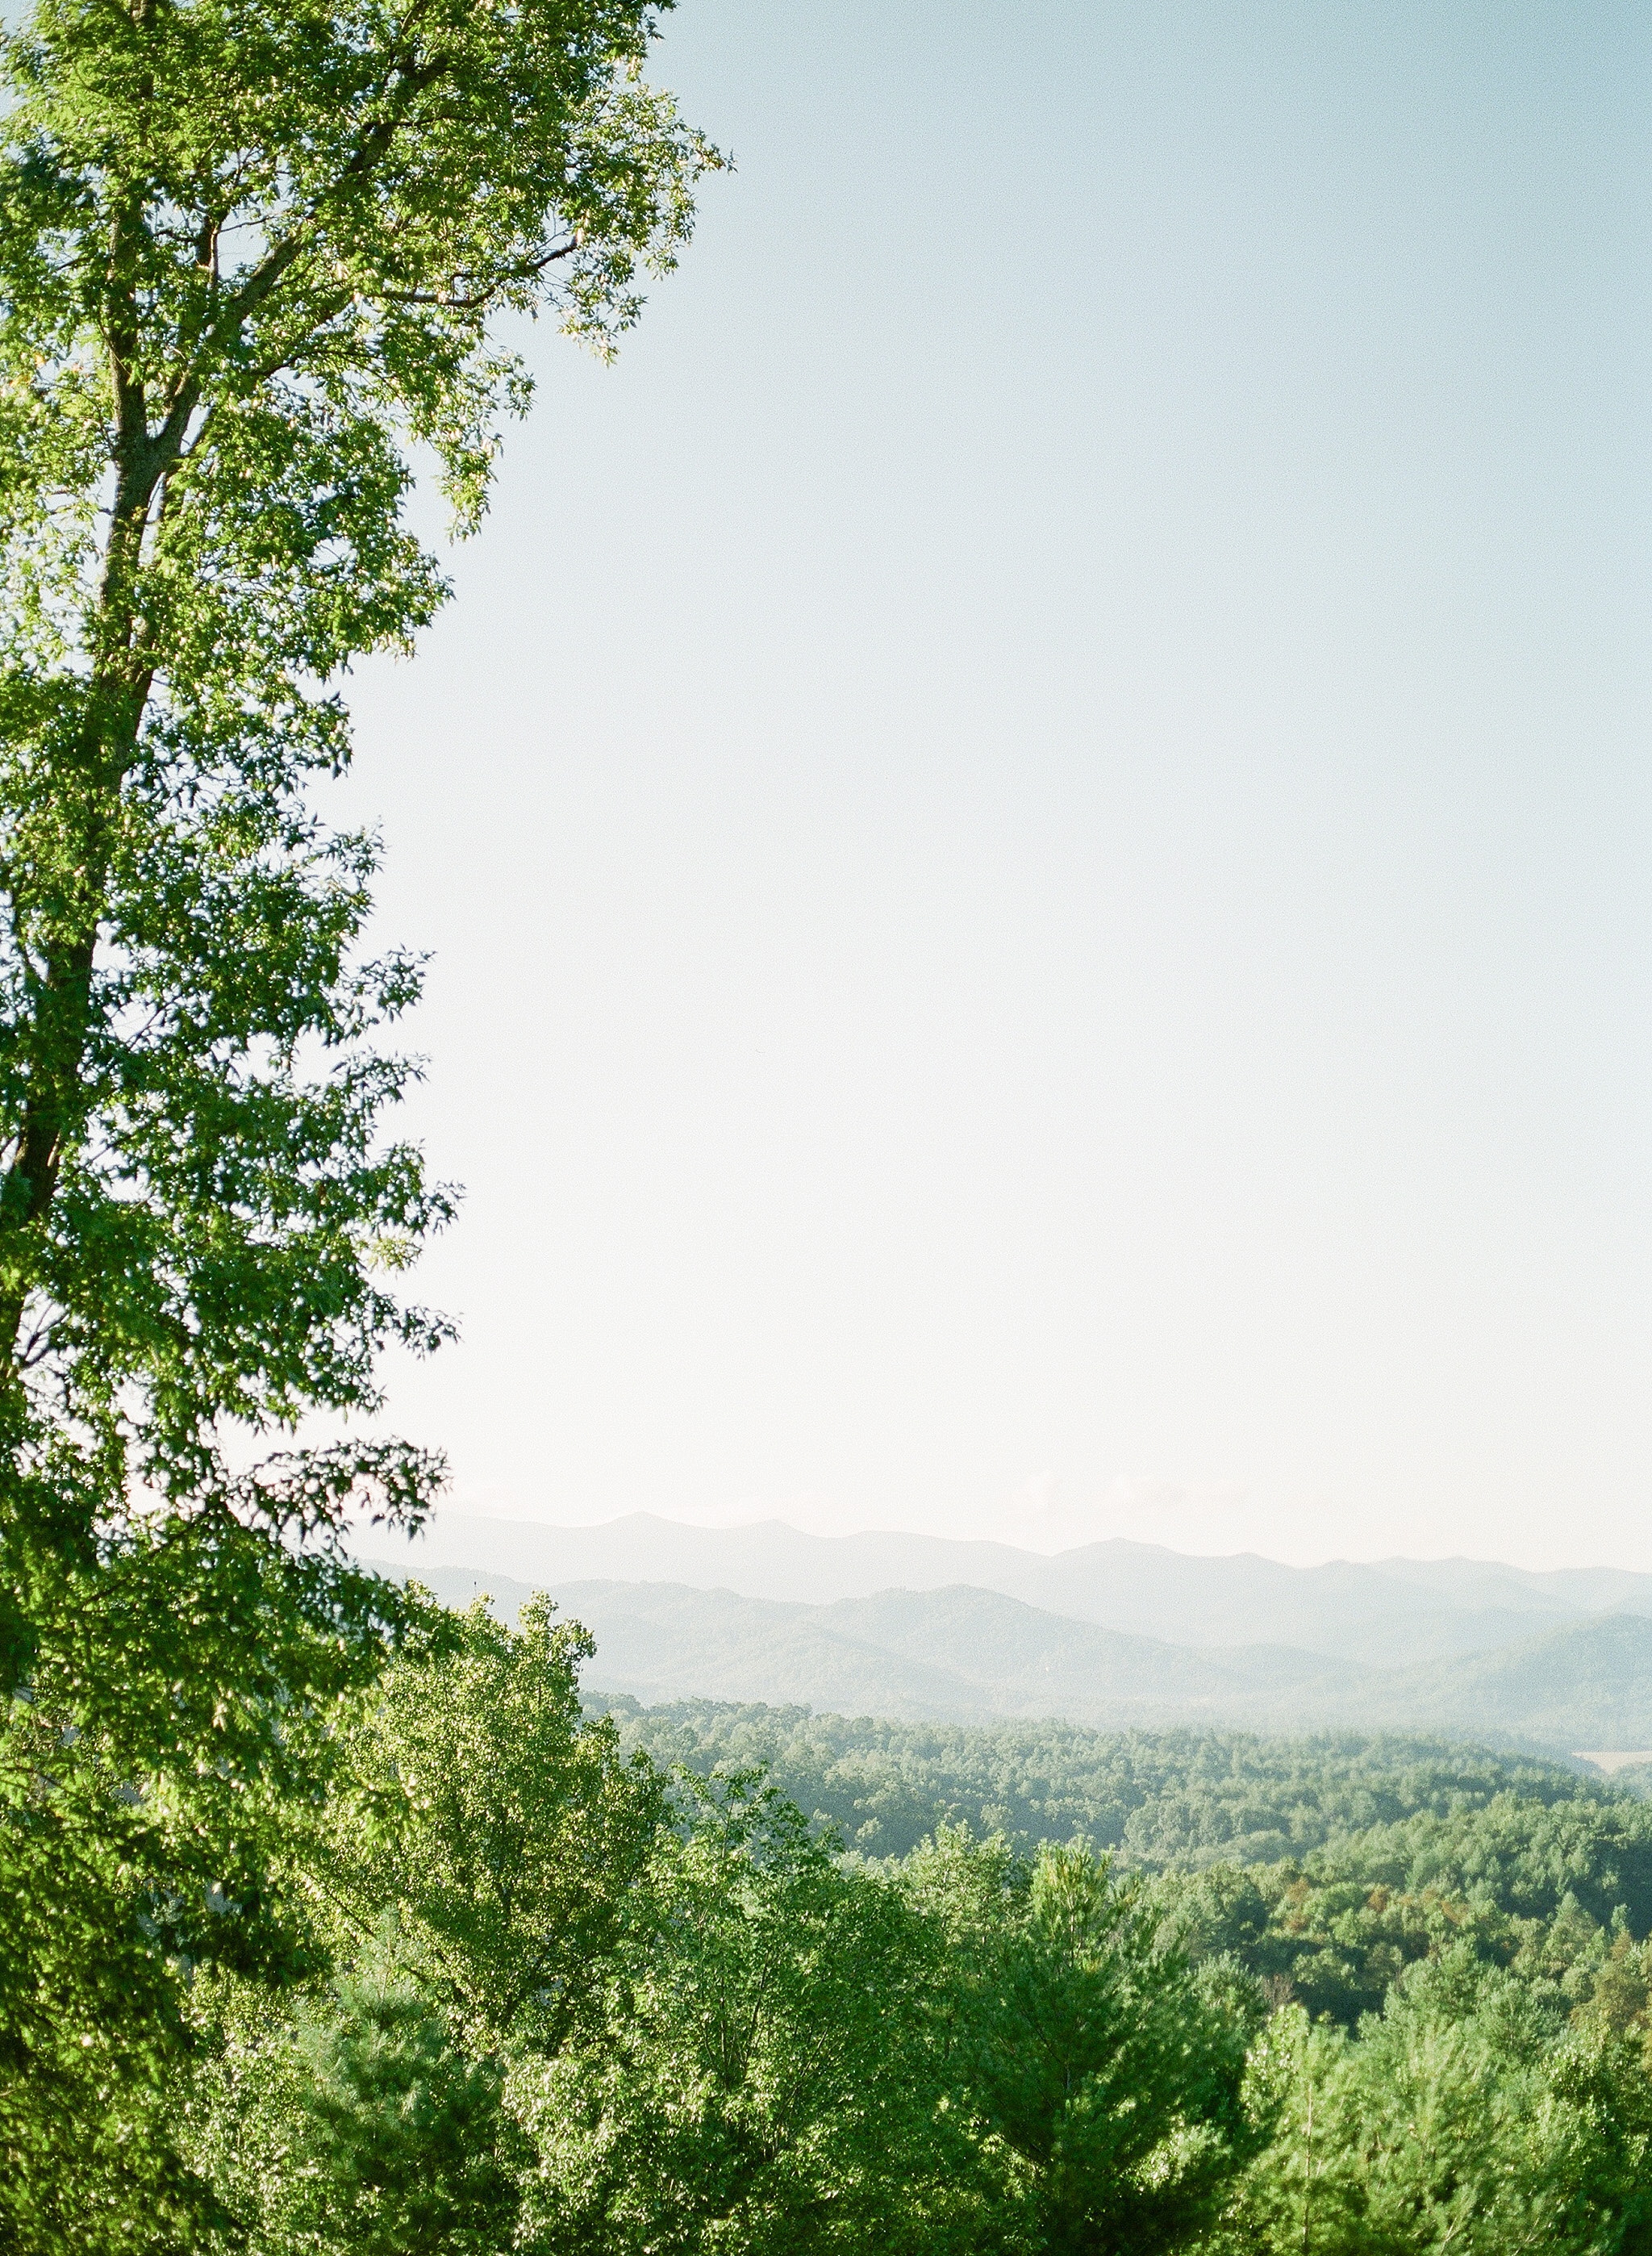 Fine art travel photography from a Washington, DC wedding photographer's vacation to Asheville, NC. Includes stops at Biltmore Estate and the Blue Ridge Parkway.